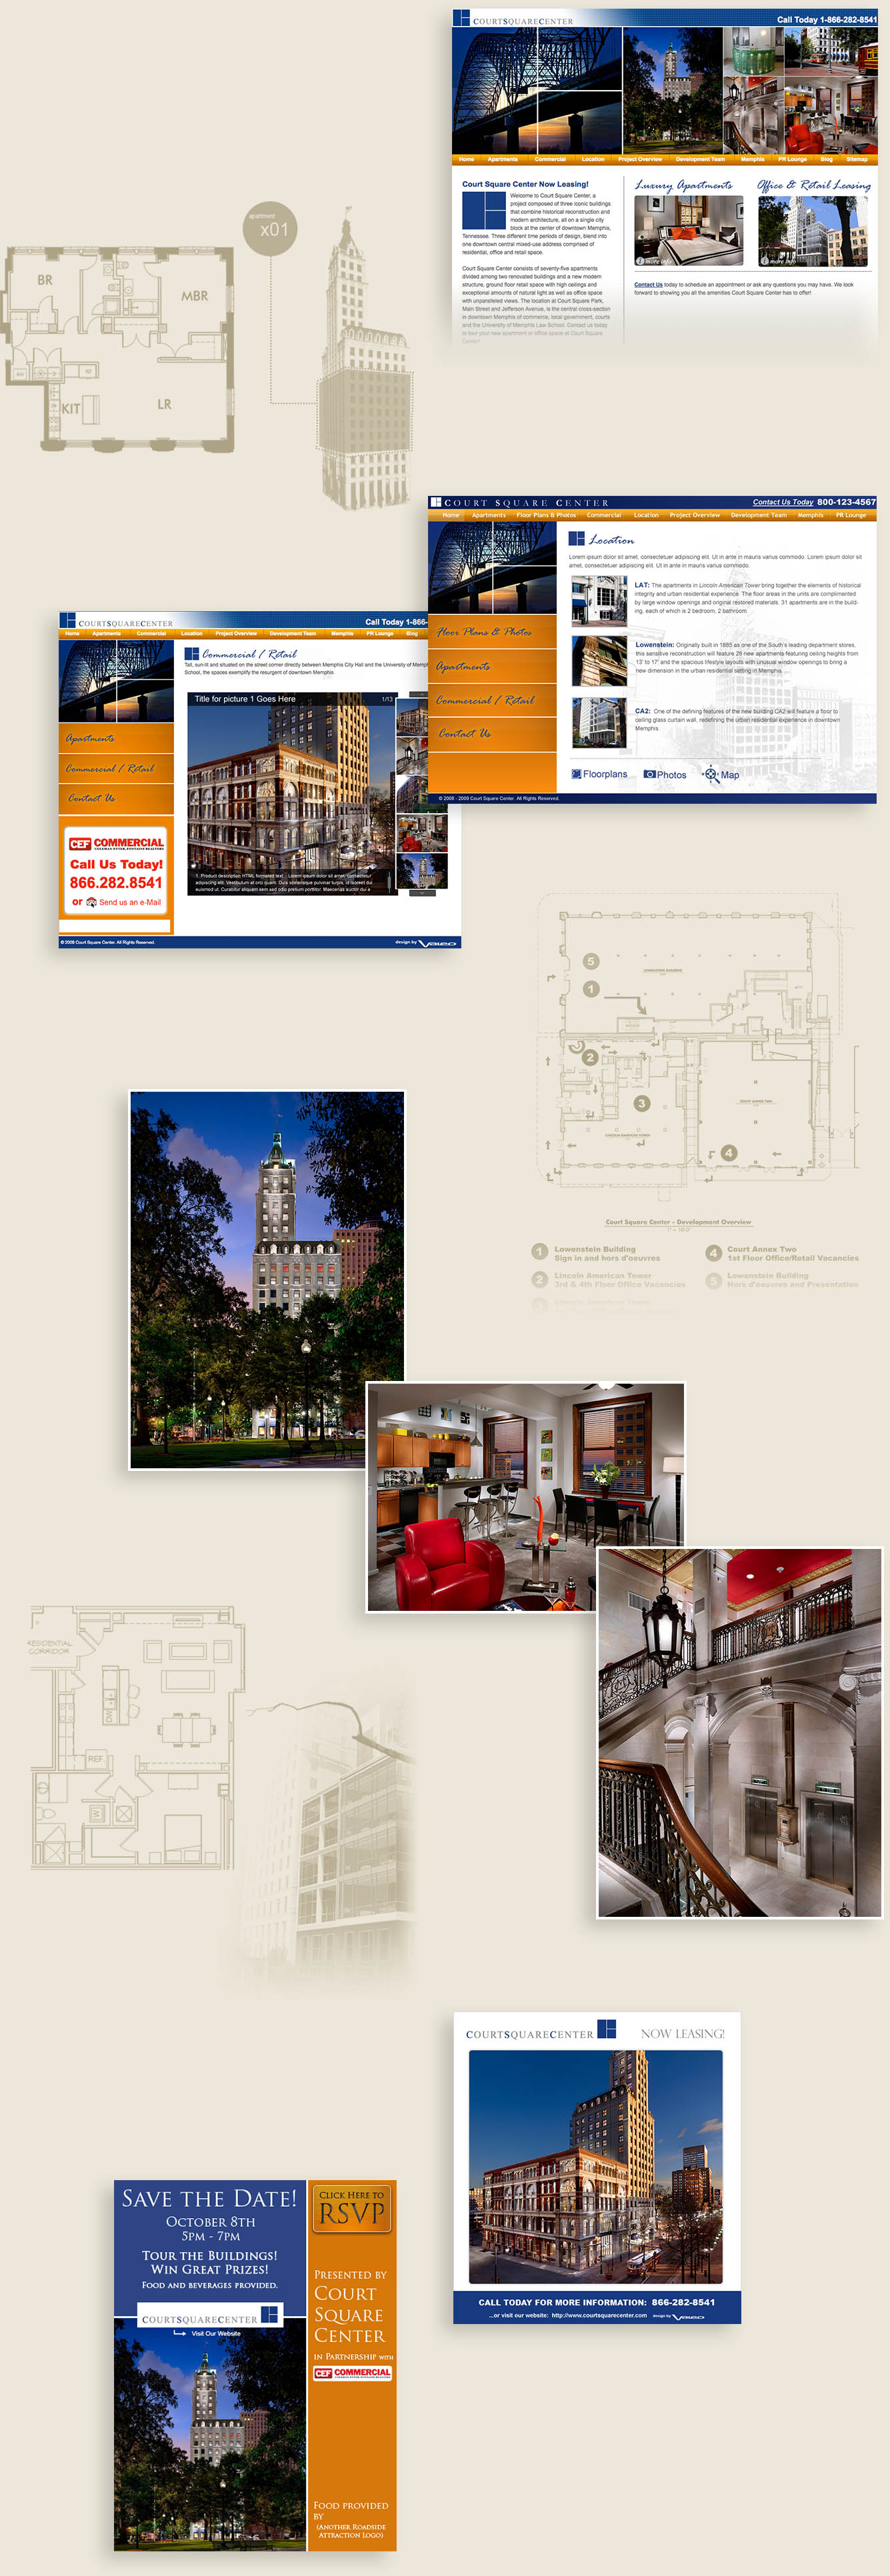 For Court Square Center, we created a website, marketing materials, and more.